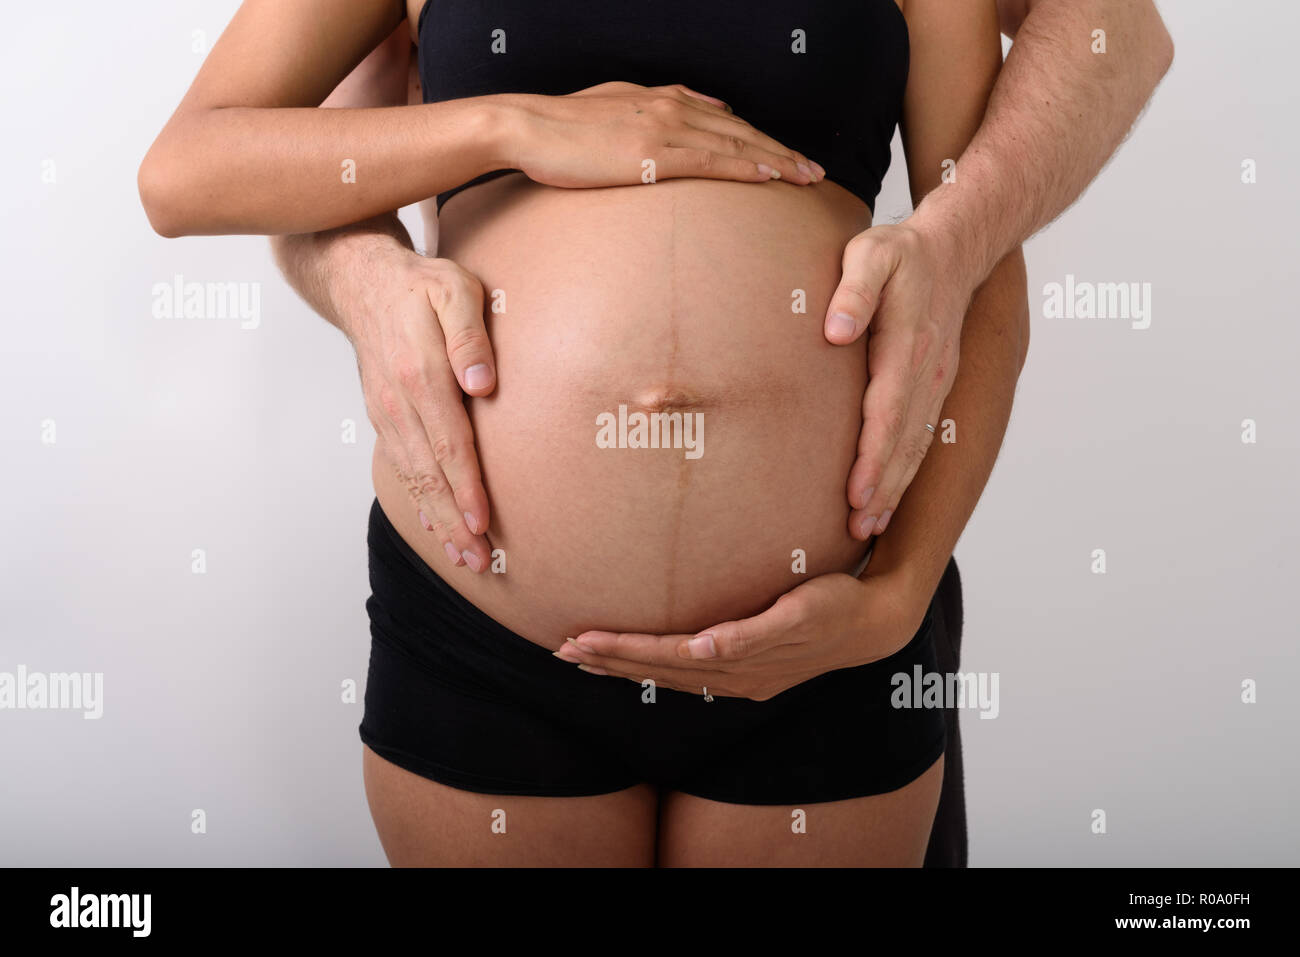 Asian pregnant woman with man holding her stomach Stock Photo